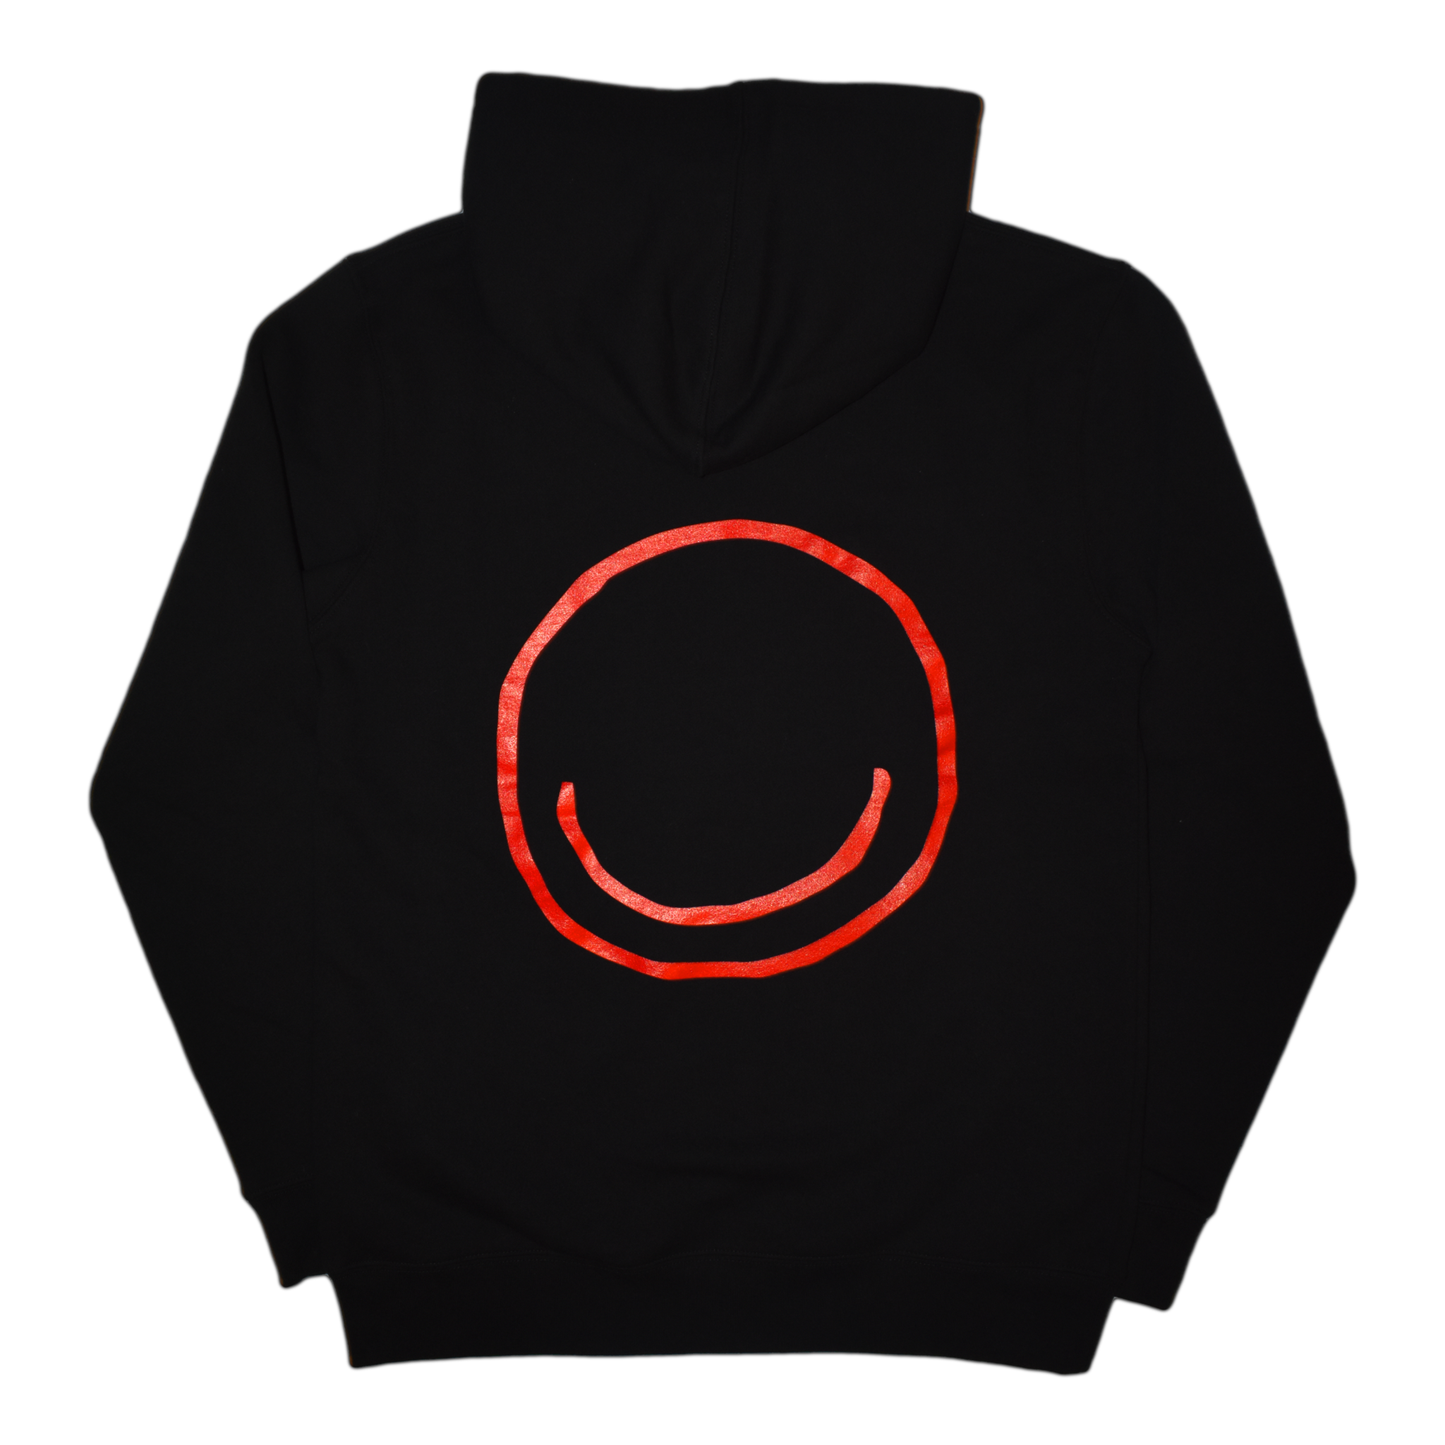 THE "IGNORANCE IS BLISS" HOODIE